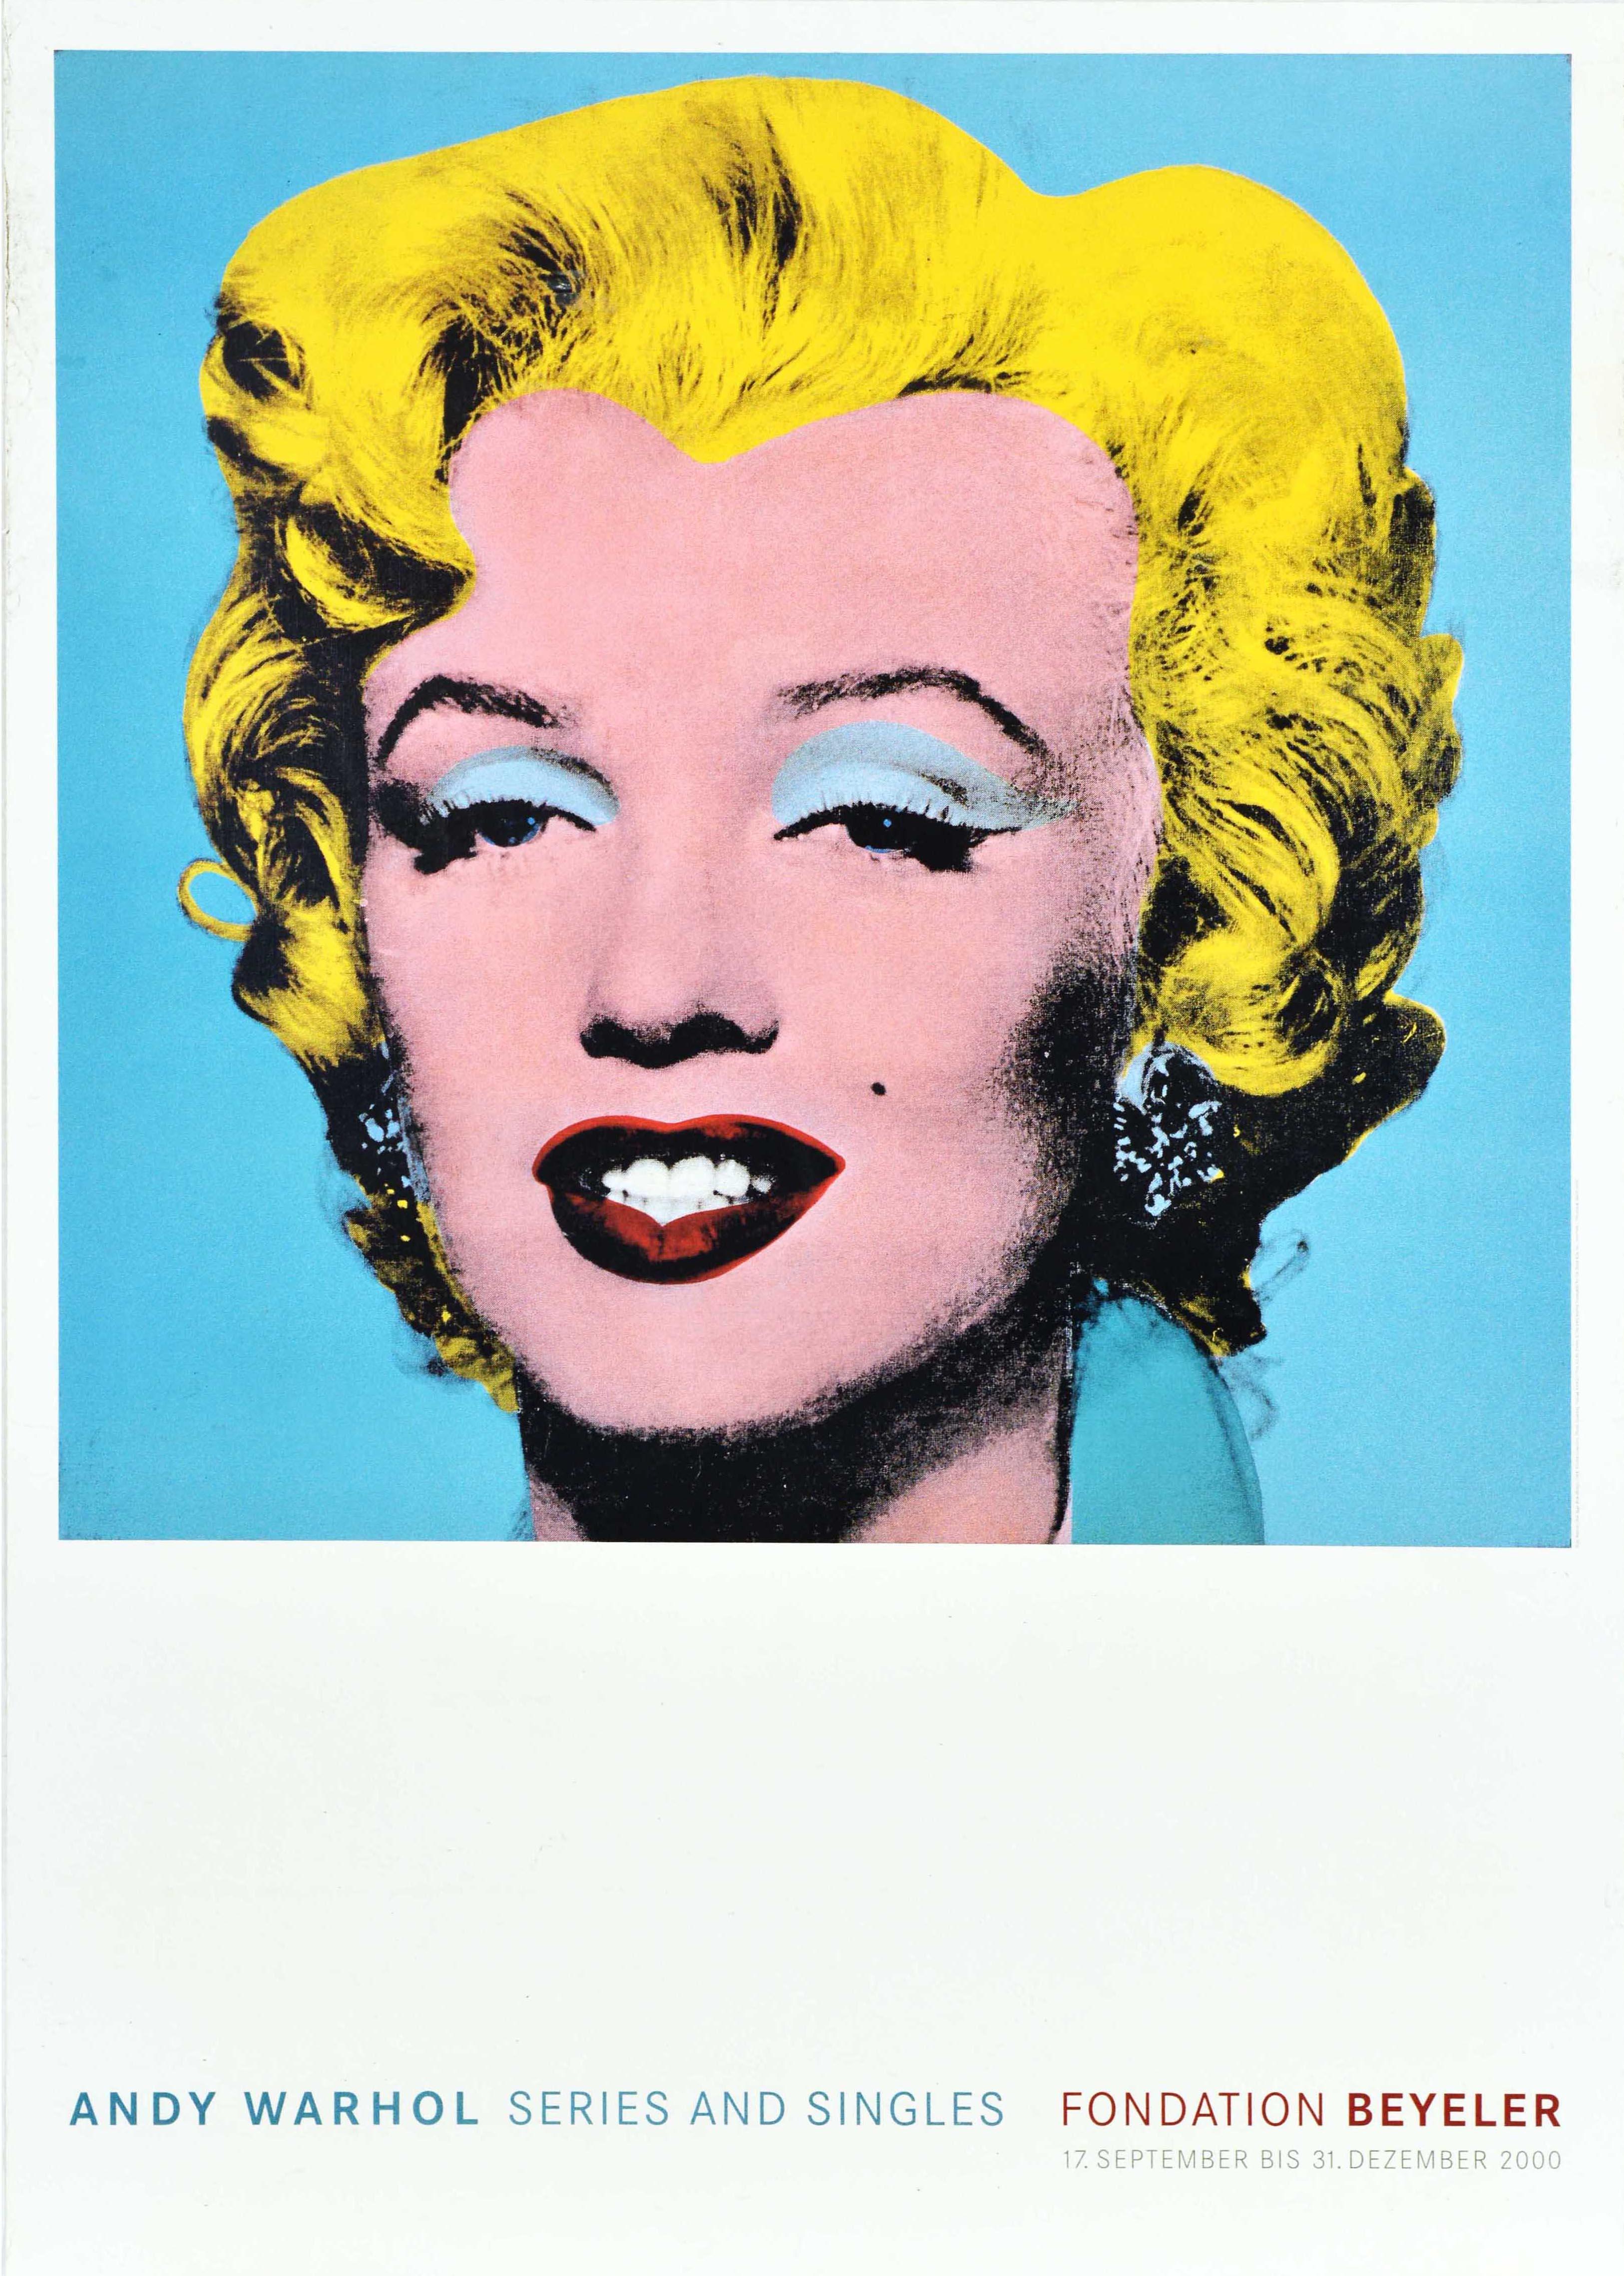 Original vintage advertising poster for an Andy Warhol Series and Singles Exhibition at the Fondation Beyeler from 17 September to 31 December 2000 featuring an iconic pop art design by the notable artist Andy Warhol (1928-1987) showing a colourful